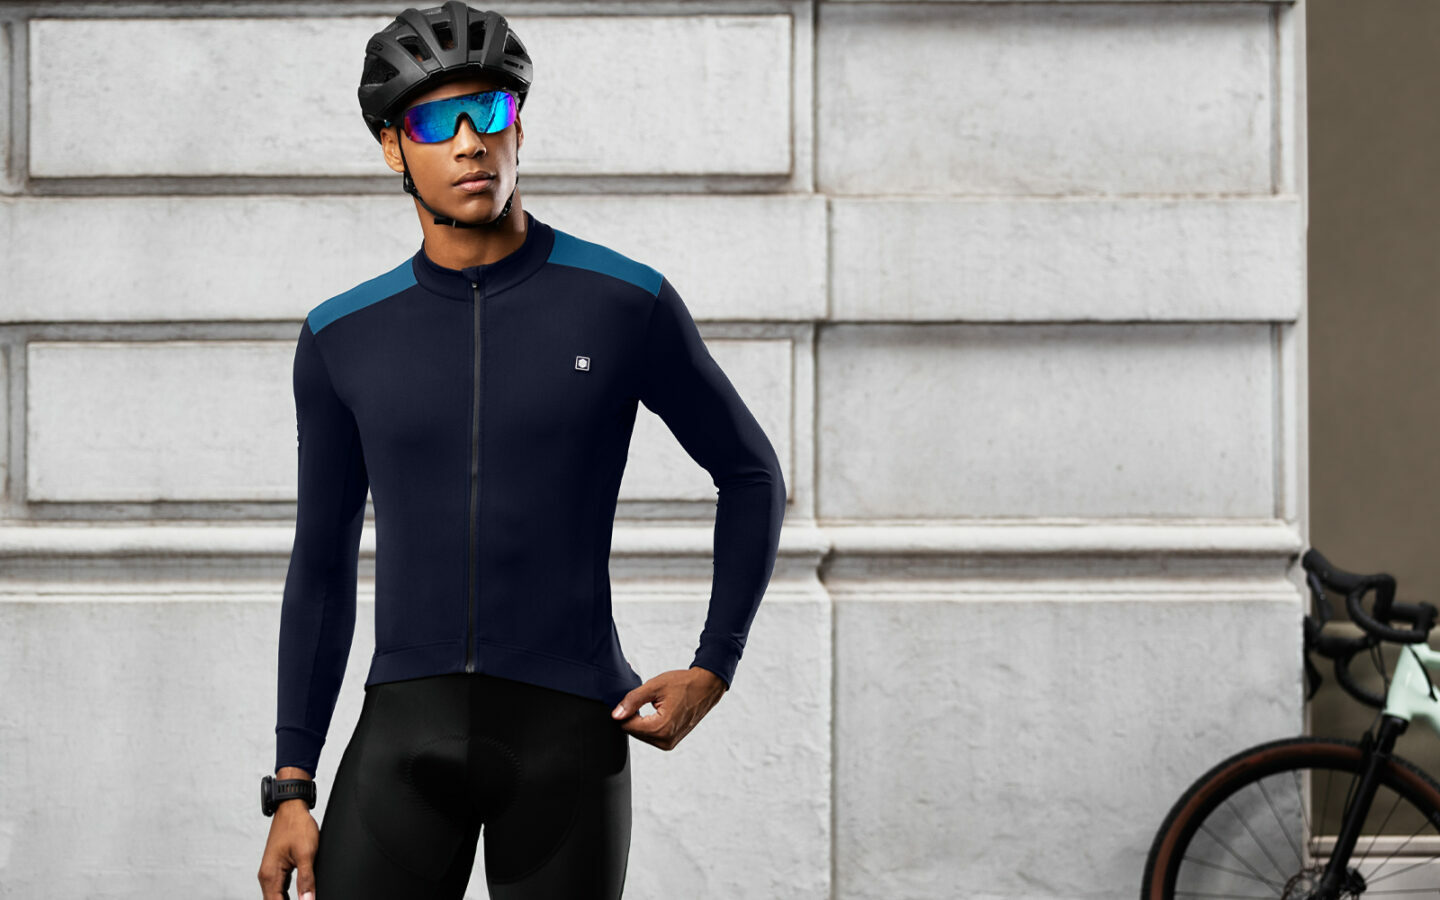 Best autumn cycling kit  Long-sleeve jerseys and shorts reviewed